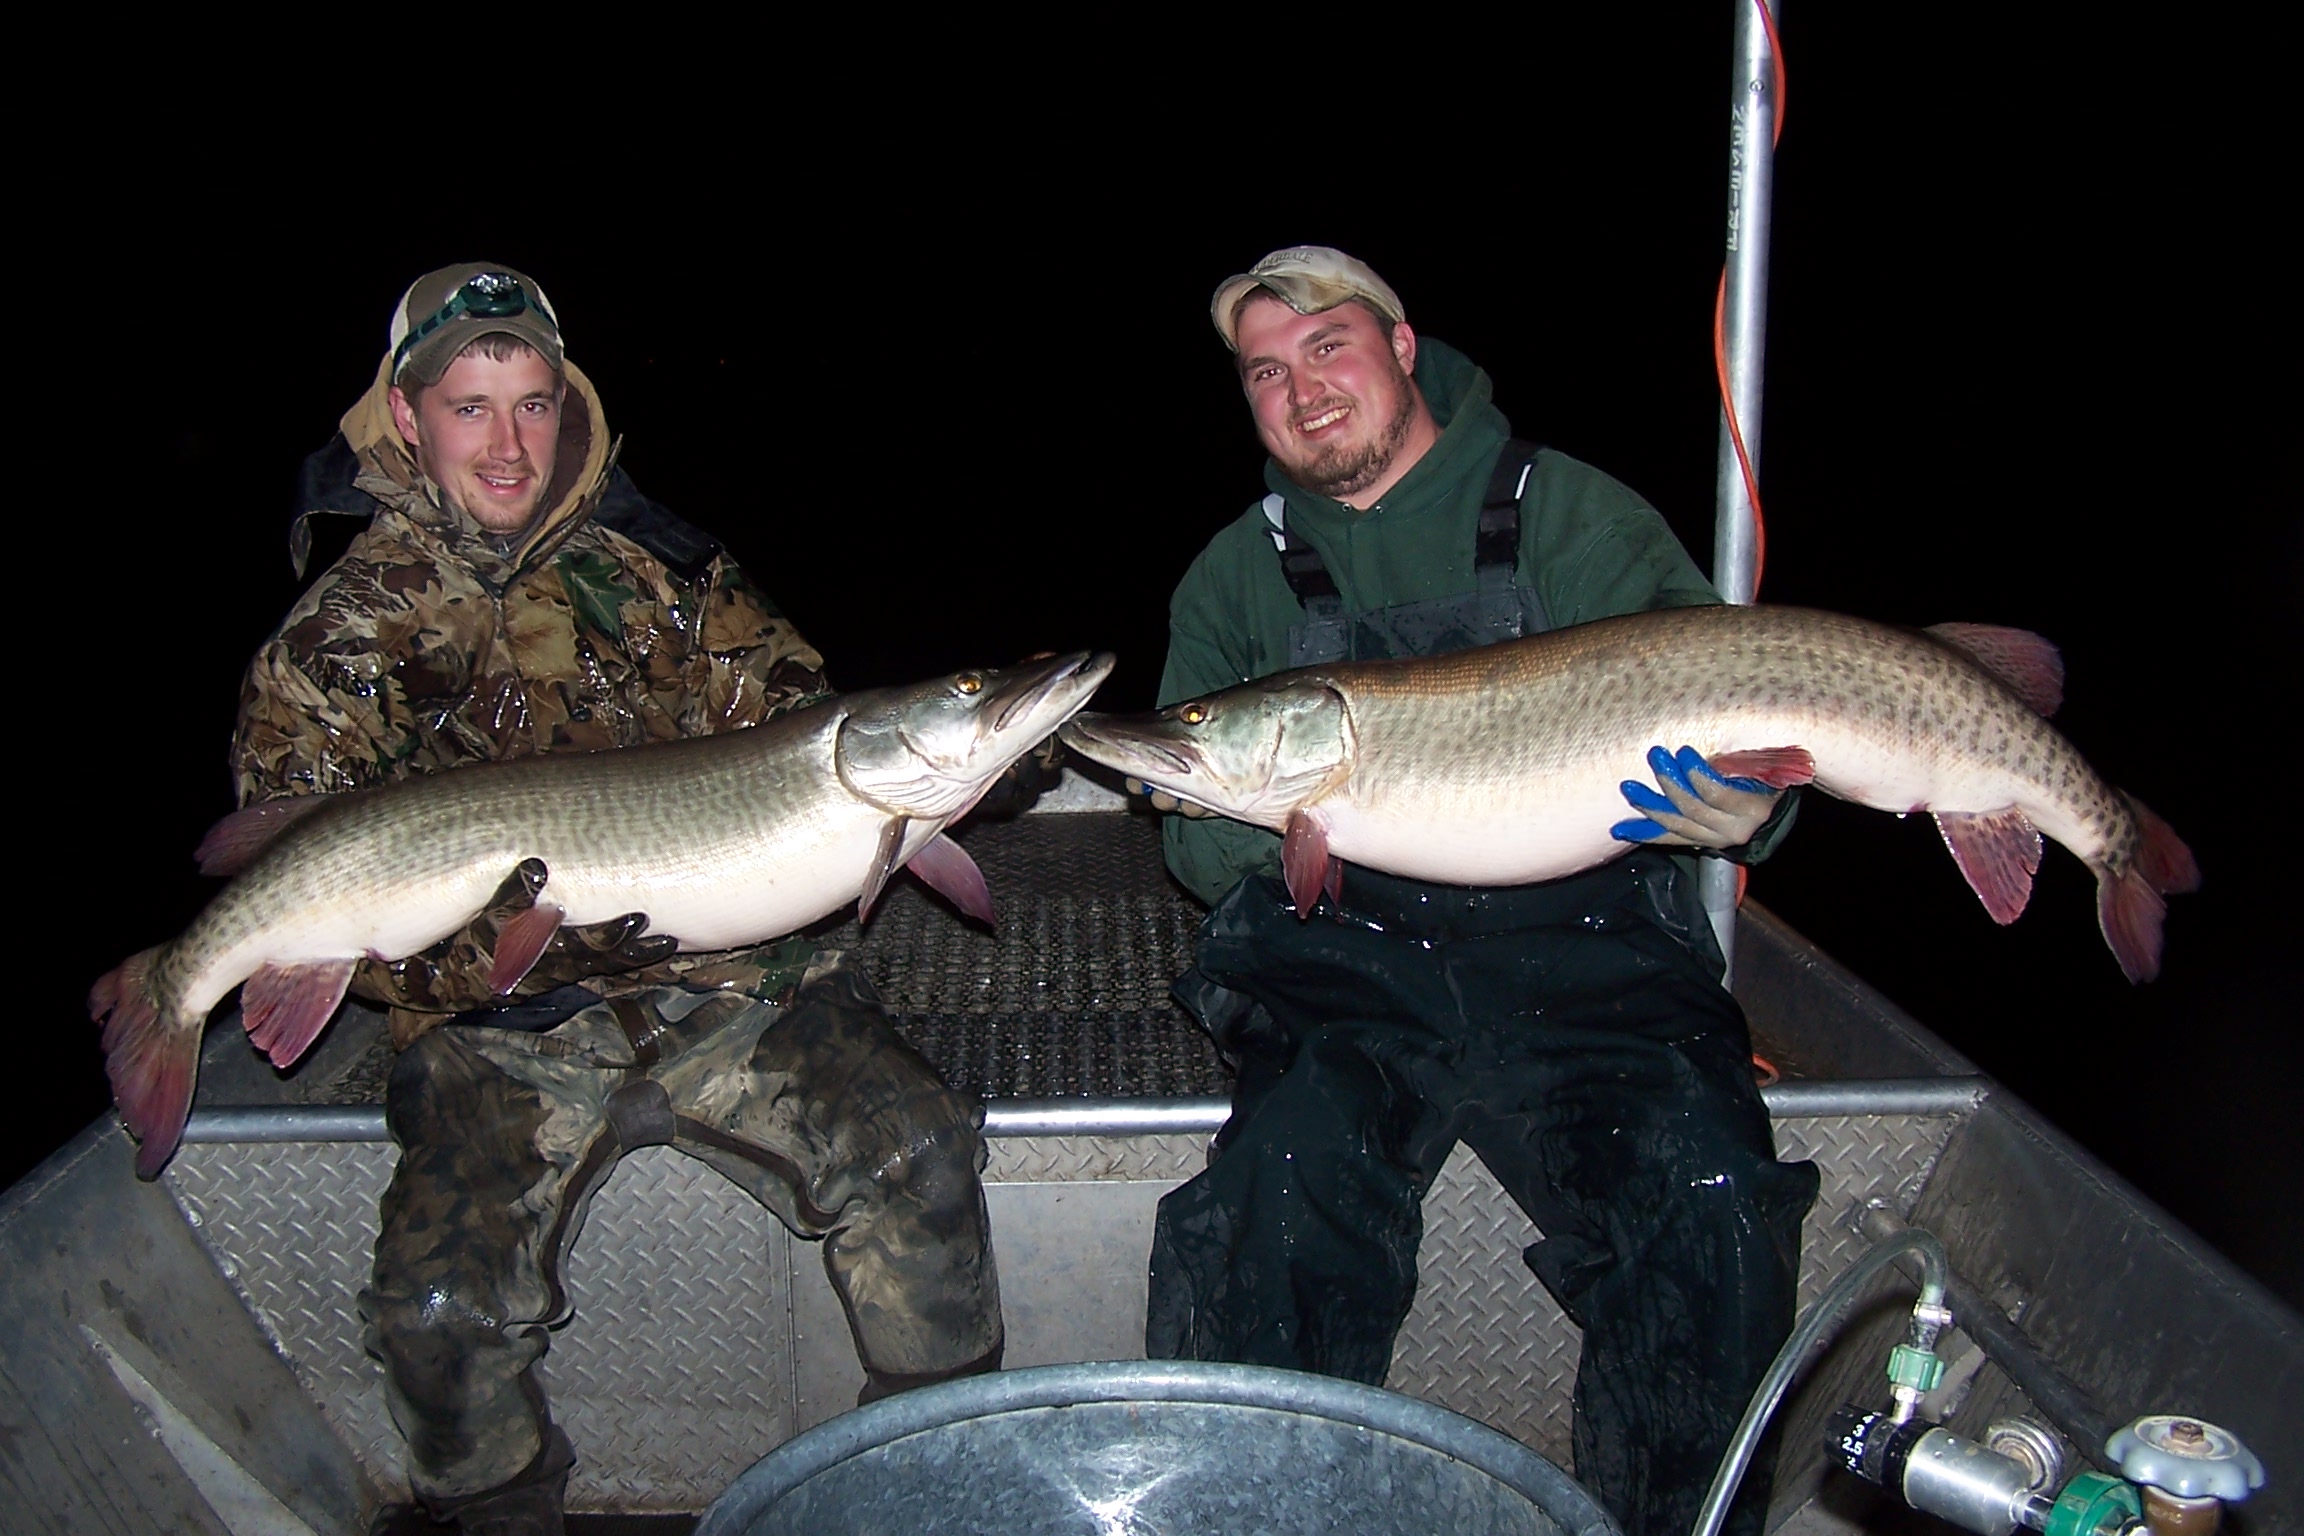 Fisheries staff gillnetting muskellunge in the spring.